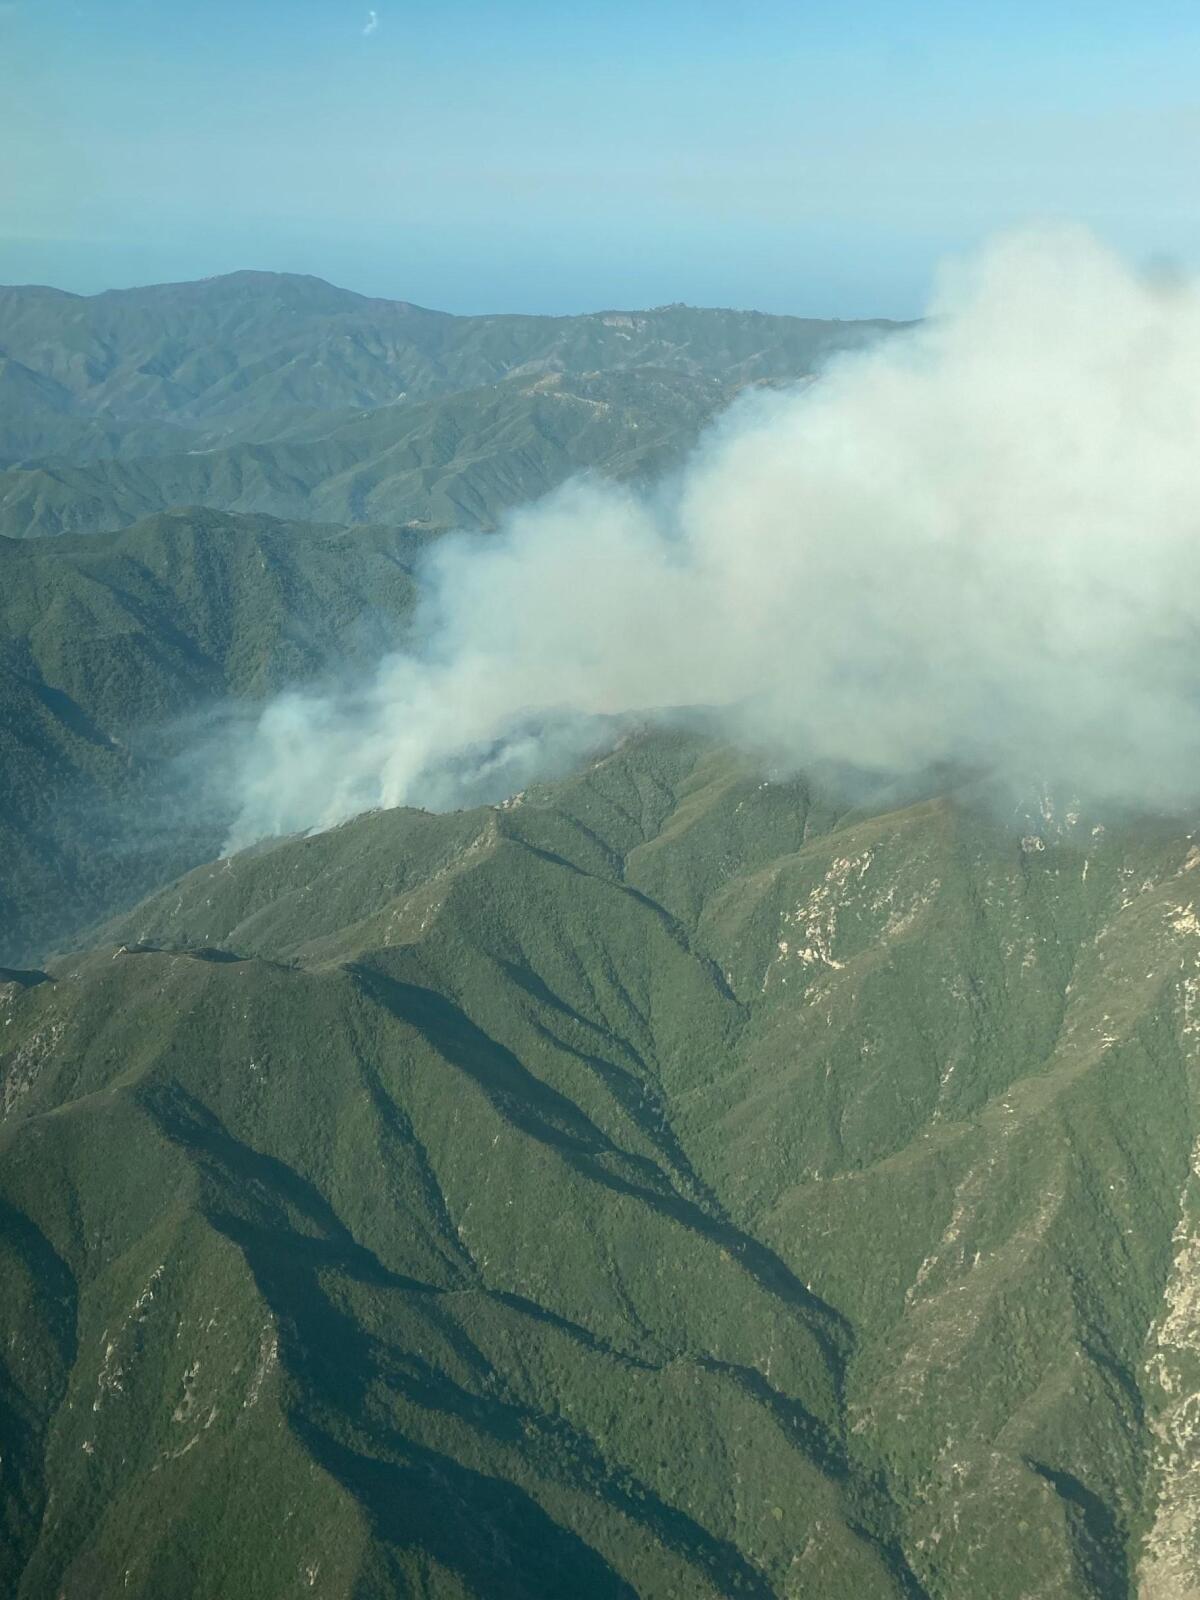 A plume of smoke hovers above the Los Padres National Forest.